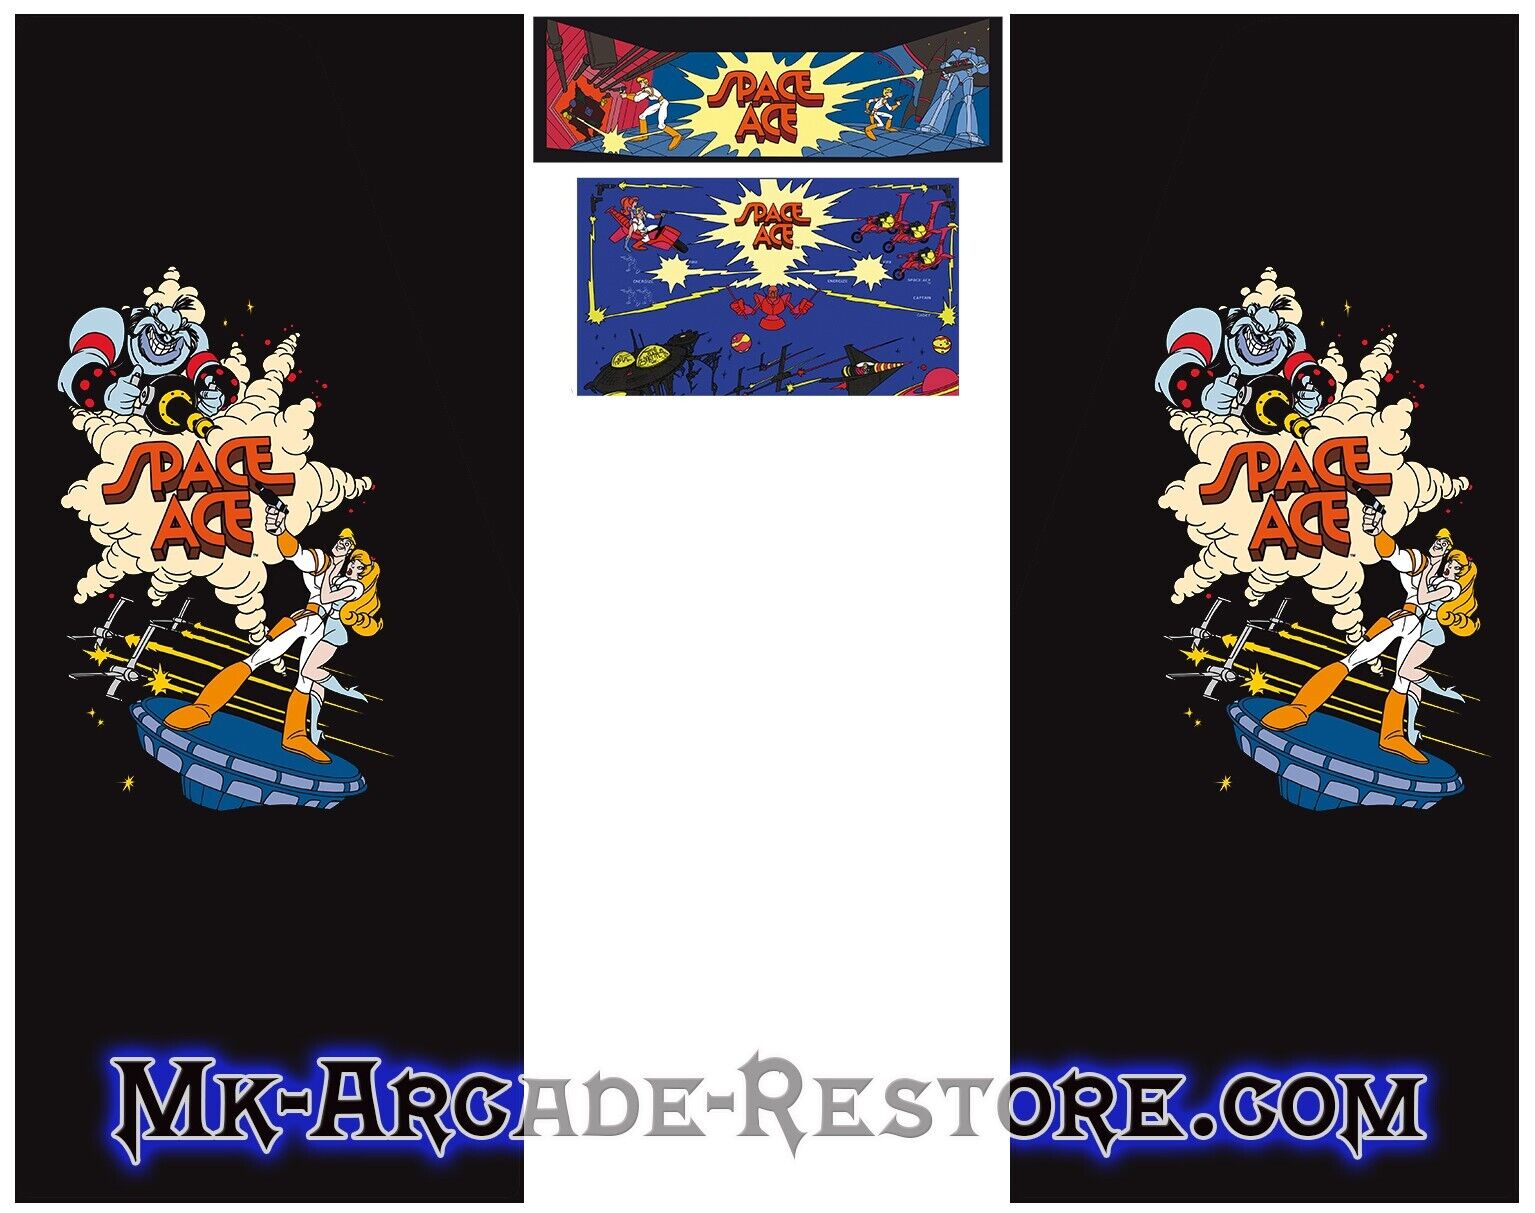 Space Ace Side Art Arcade Cabinet Kit Artwork Graphics Decals Print